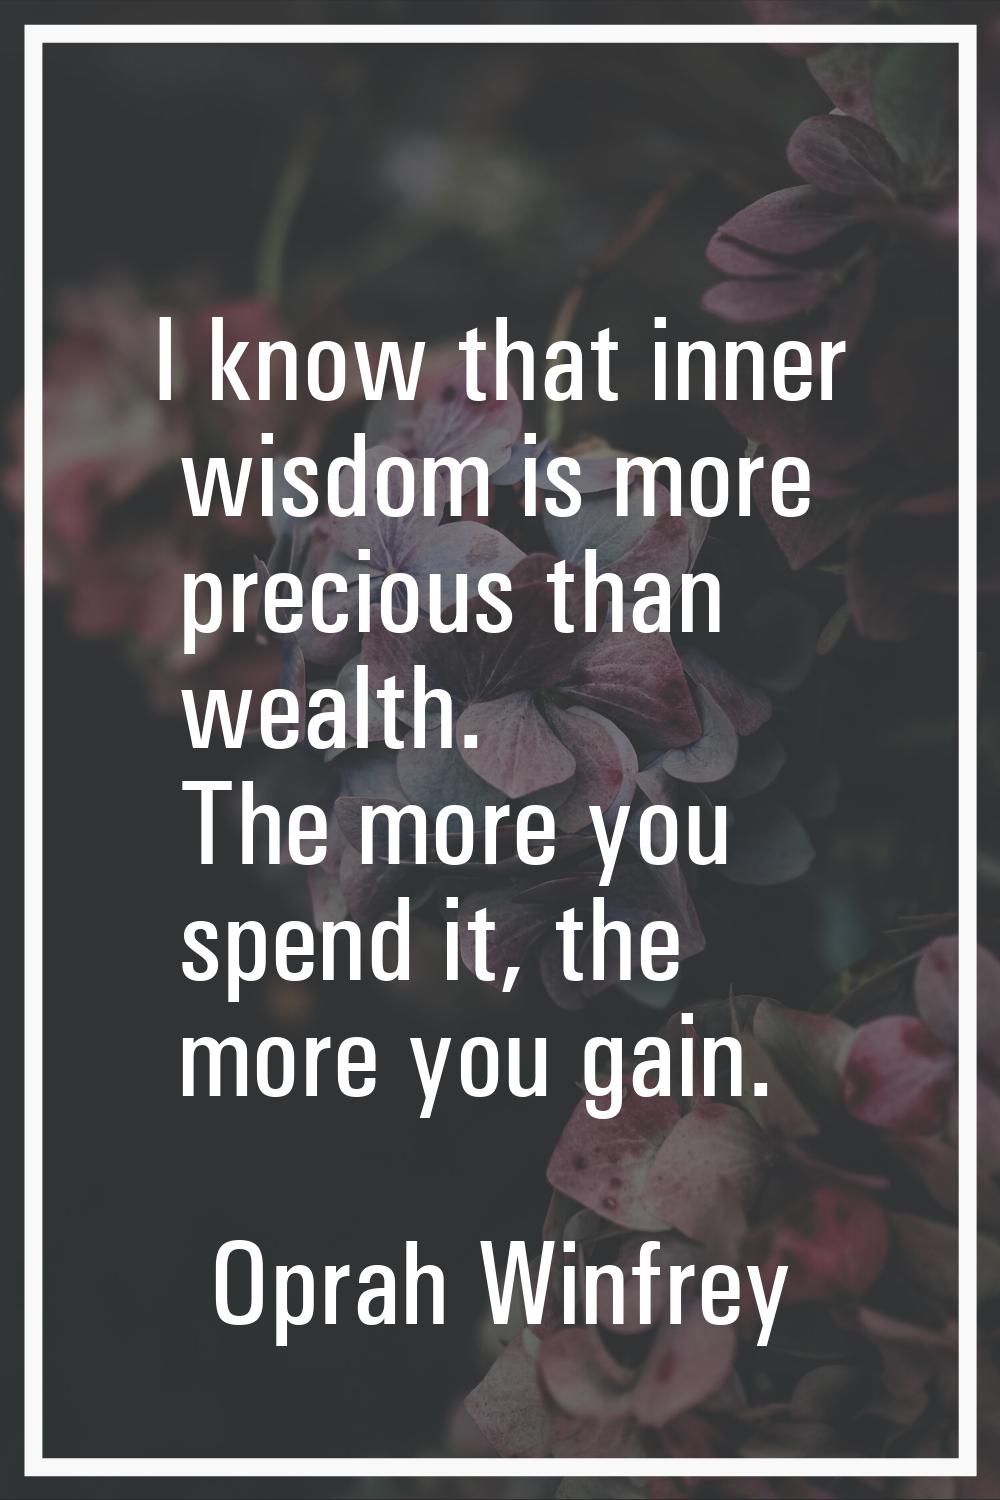 I know that inner wisdom is more precious than wealth. The more you spend it, the more you gain.